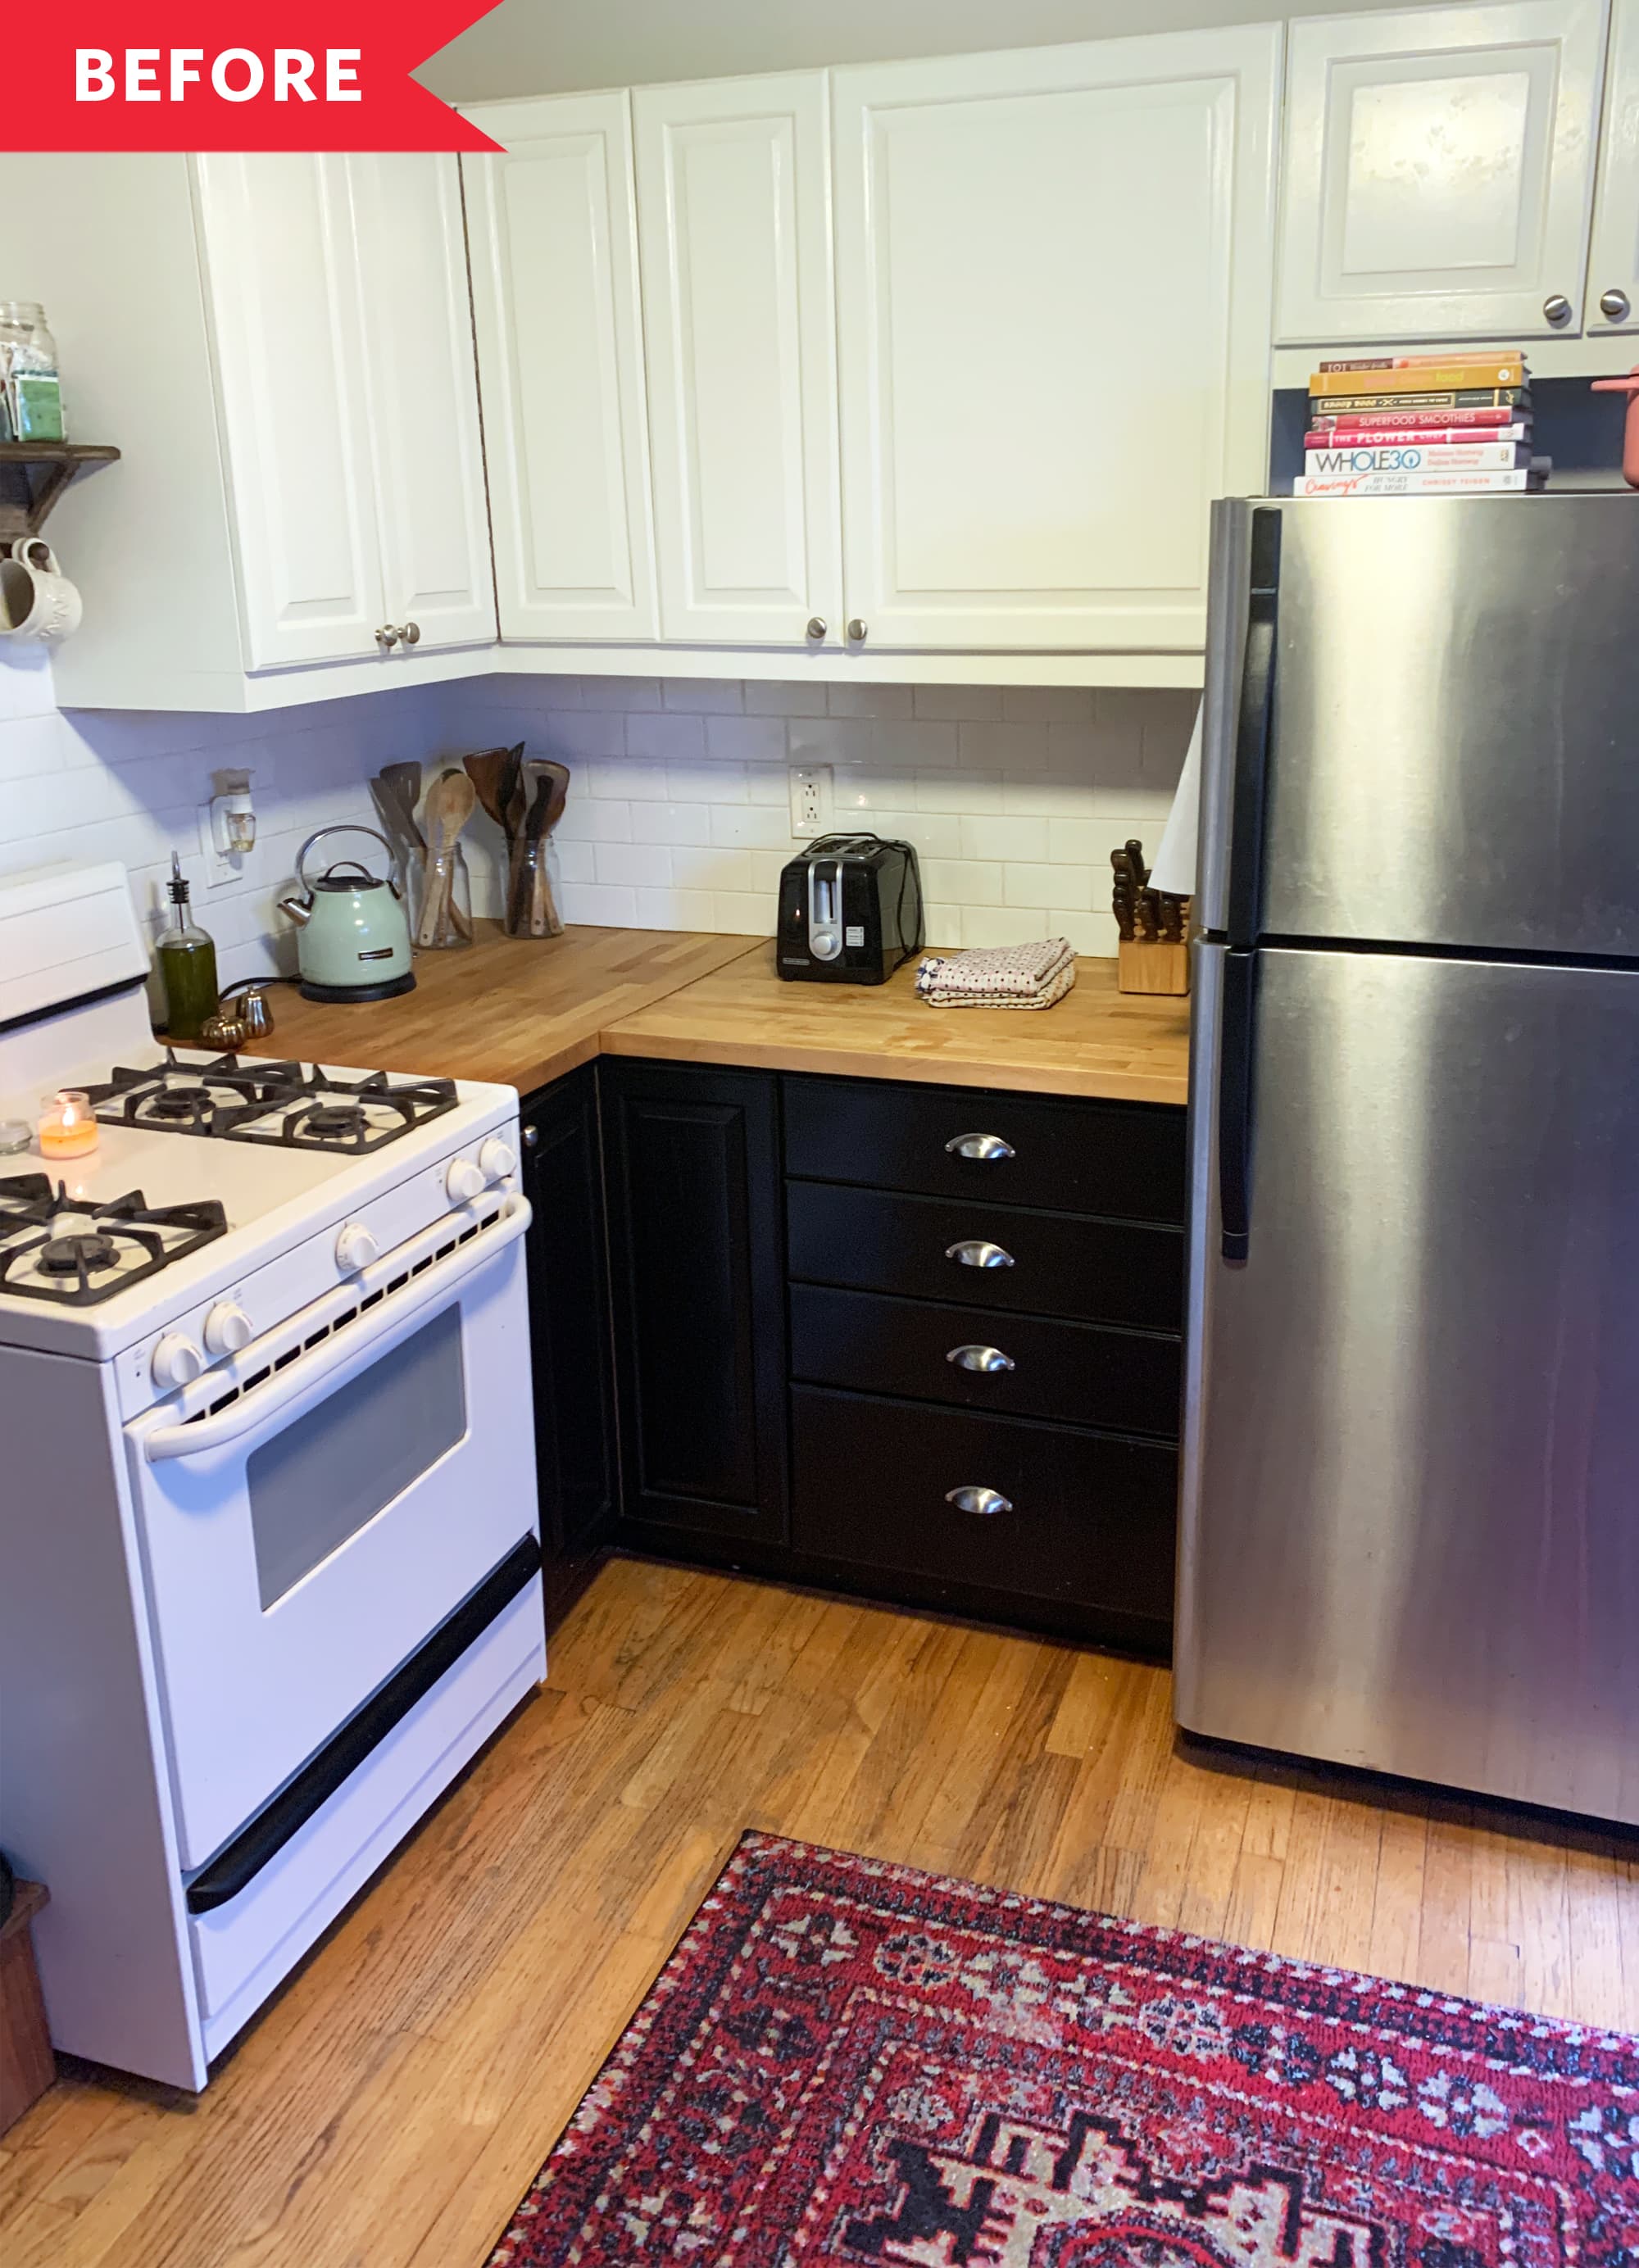 https://cdn.apartmenttherapy.info/image/upload/v1580307295/at/organize-clean/olivia-muenter-before-kitchen-decluttering.jpg